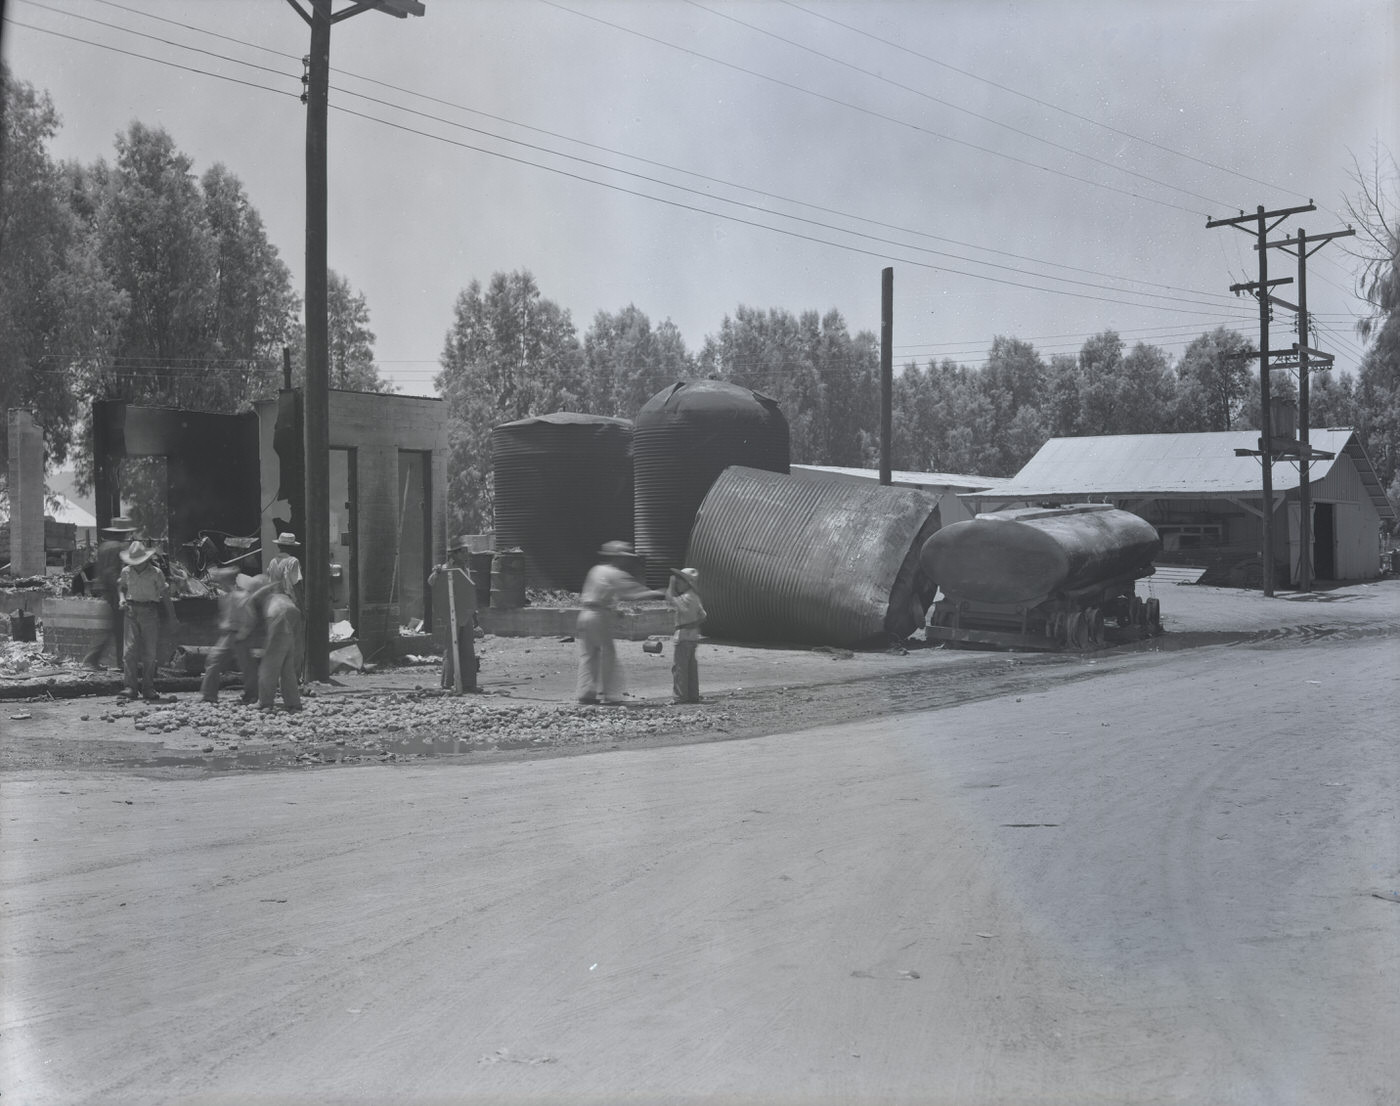 Rittenhouse Co. Lot With Damaged Equipment, 1943